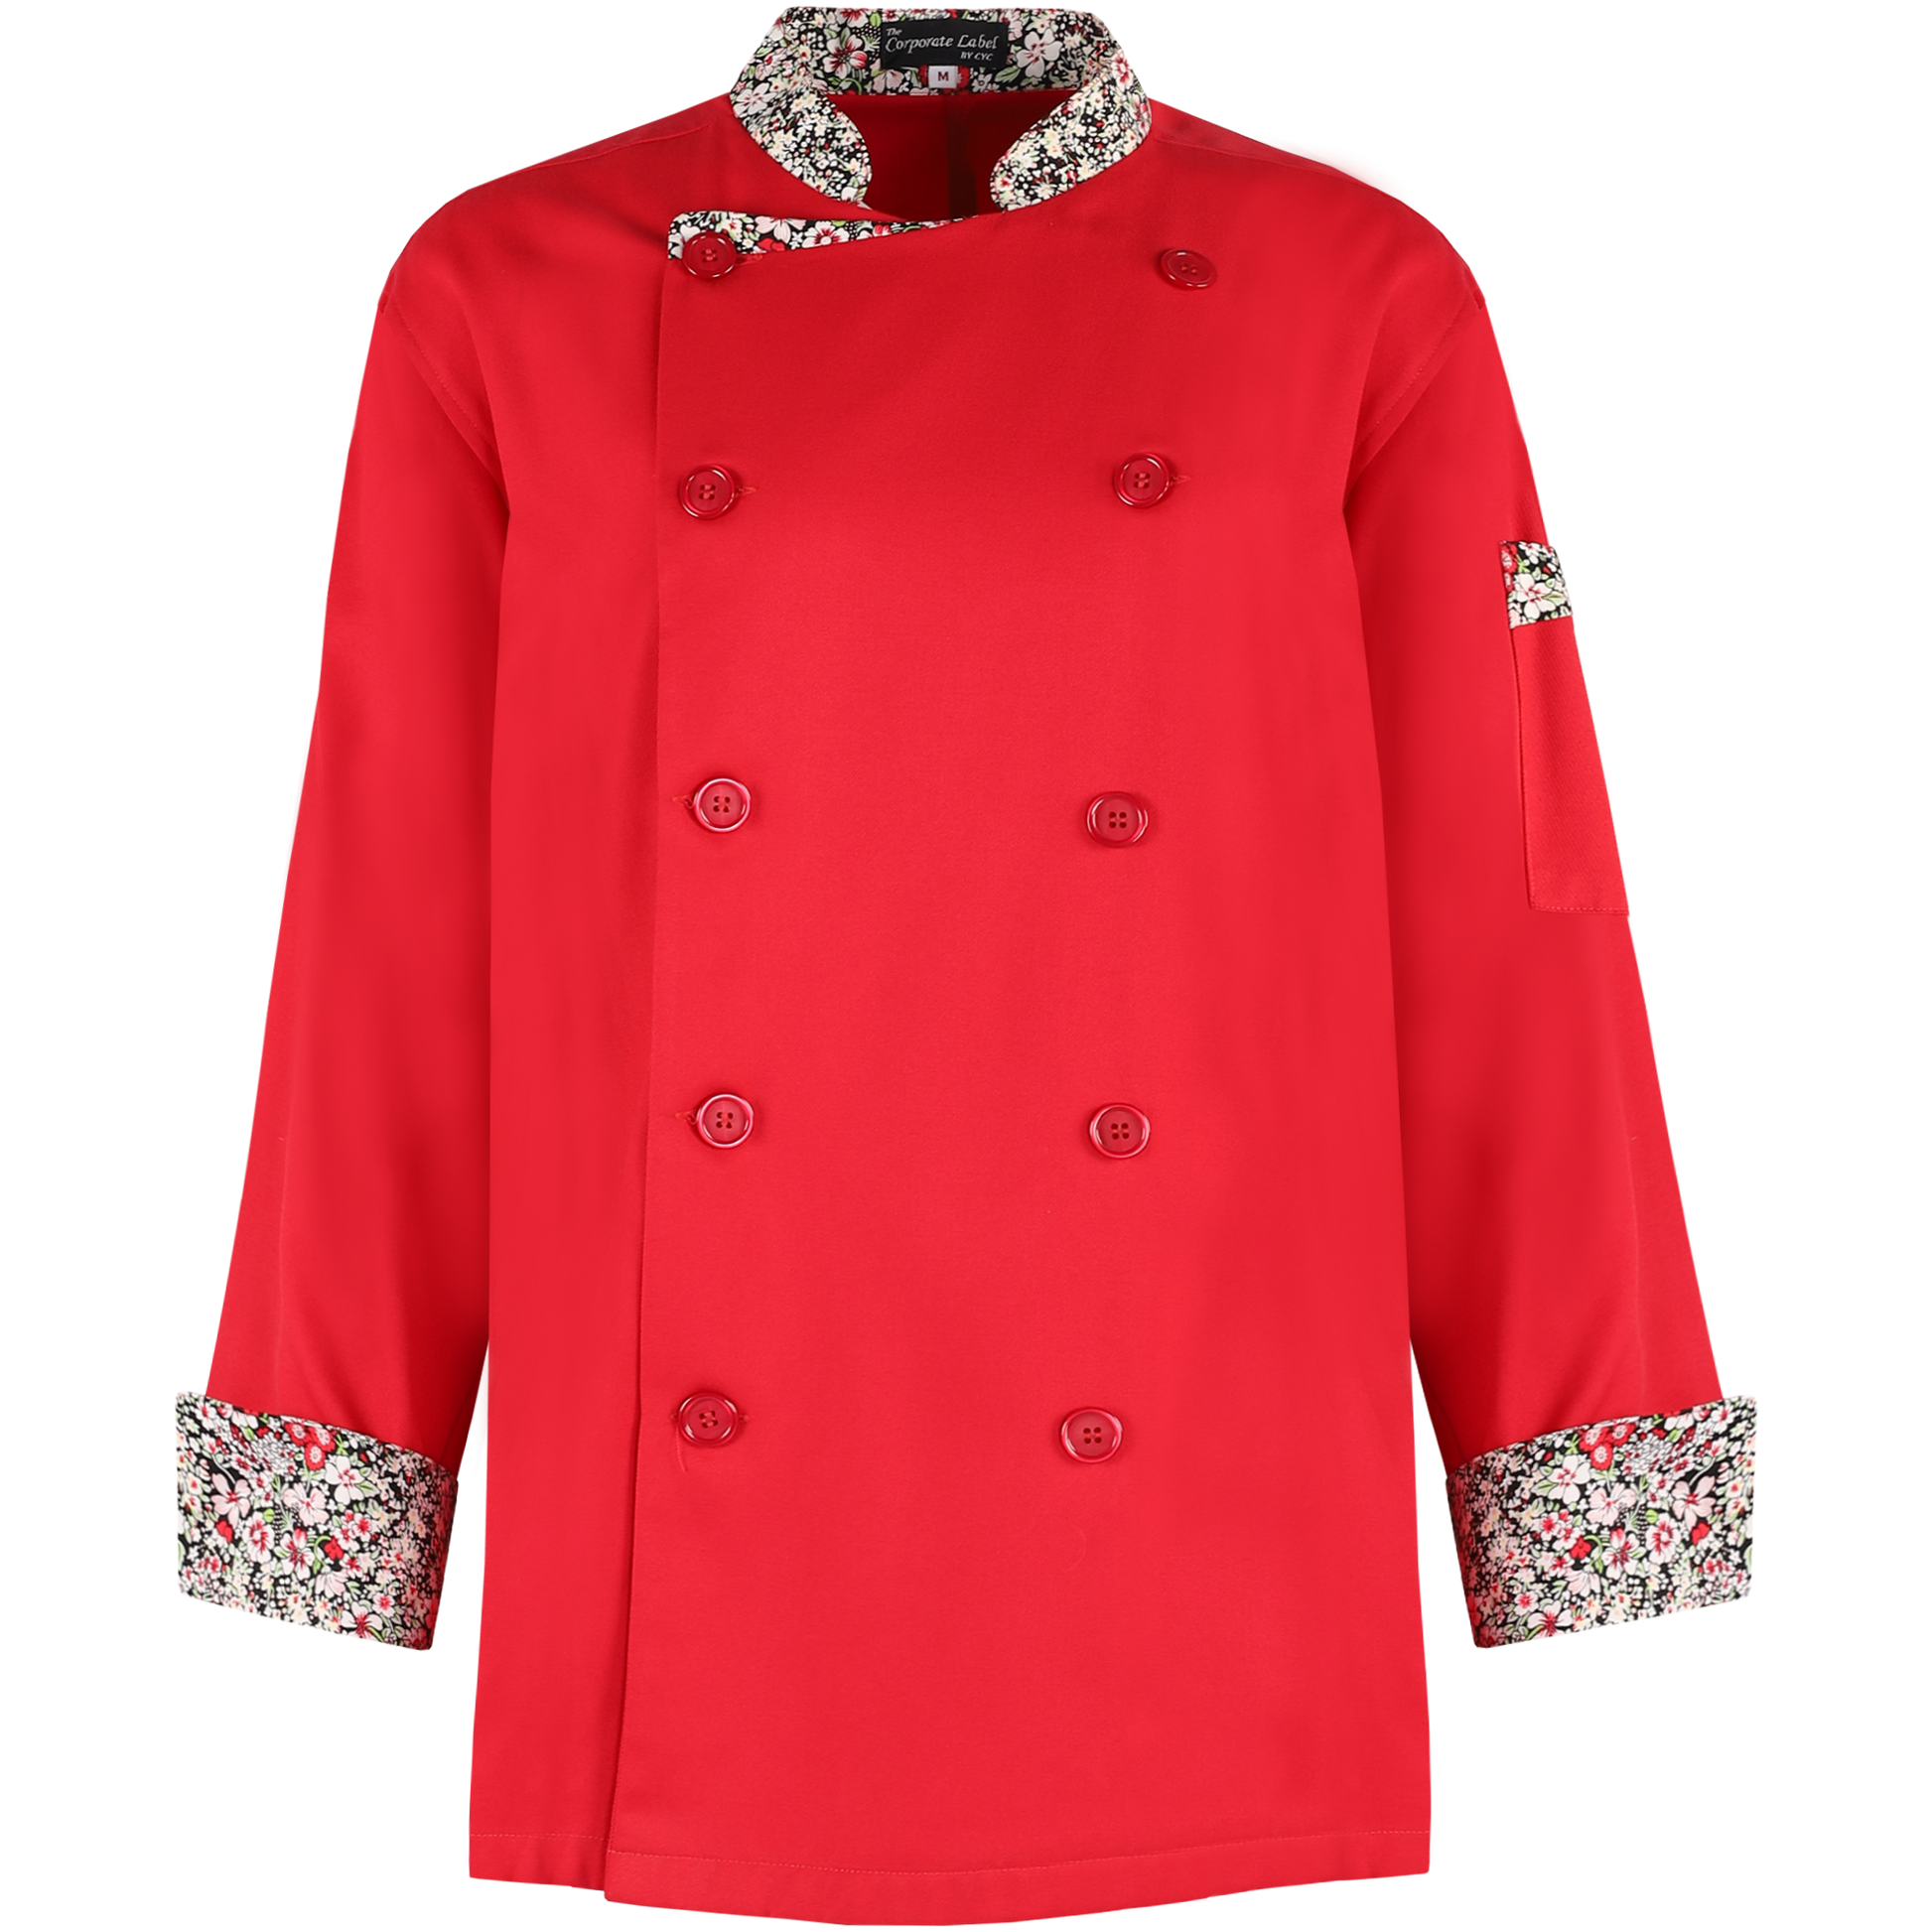 Red Chef Jacket with Floral Trims, Uniforms by CYC